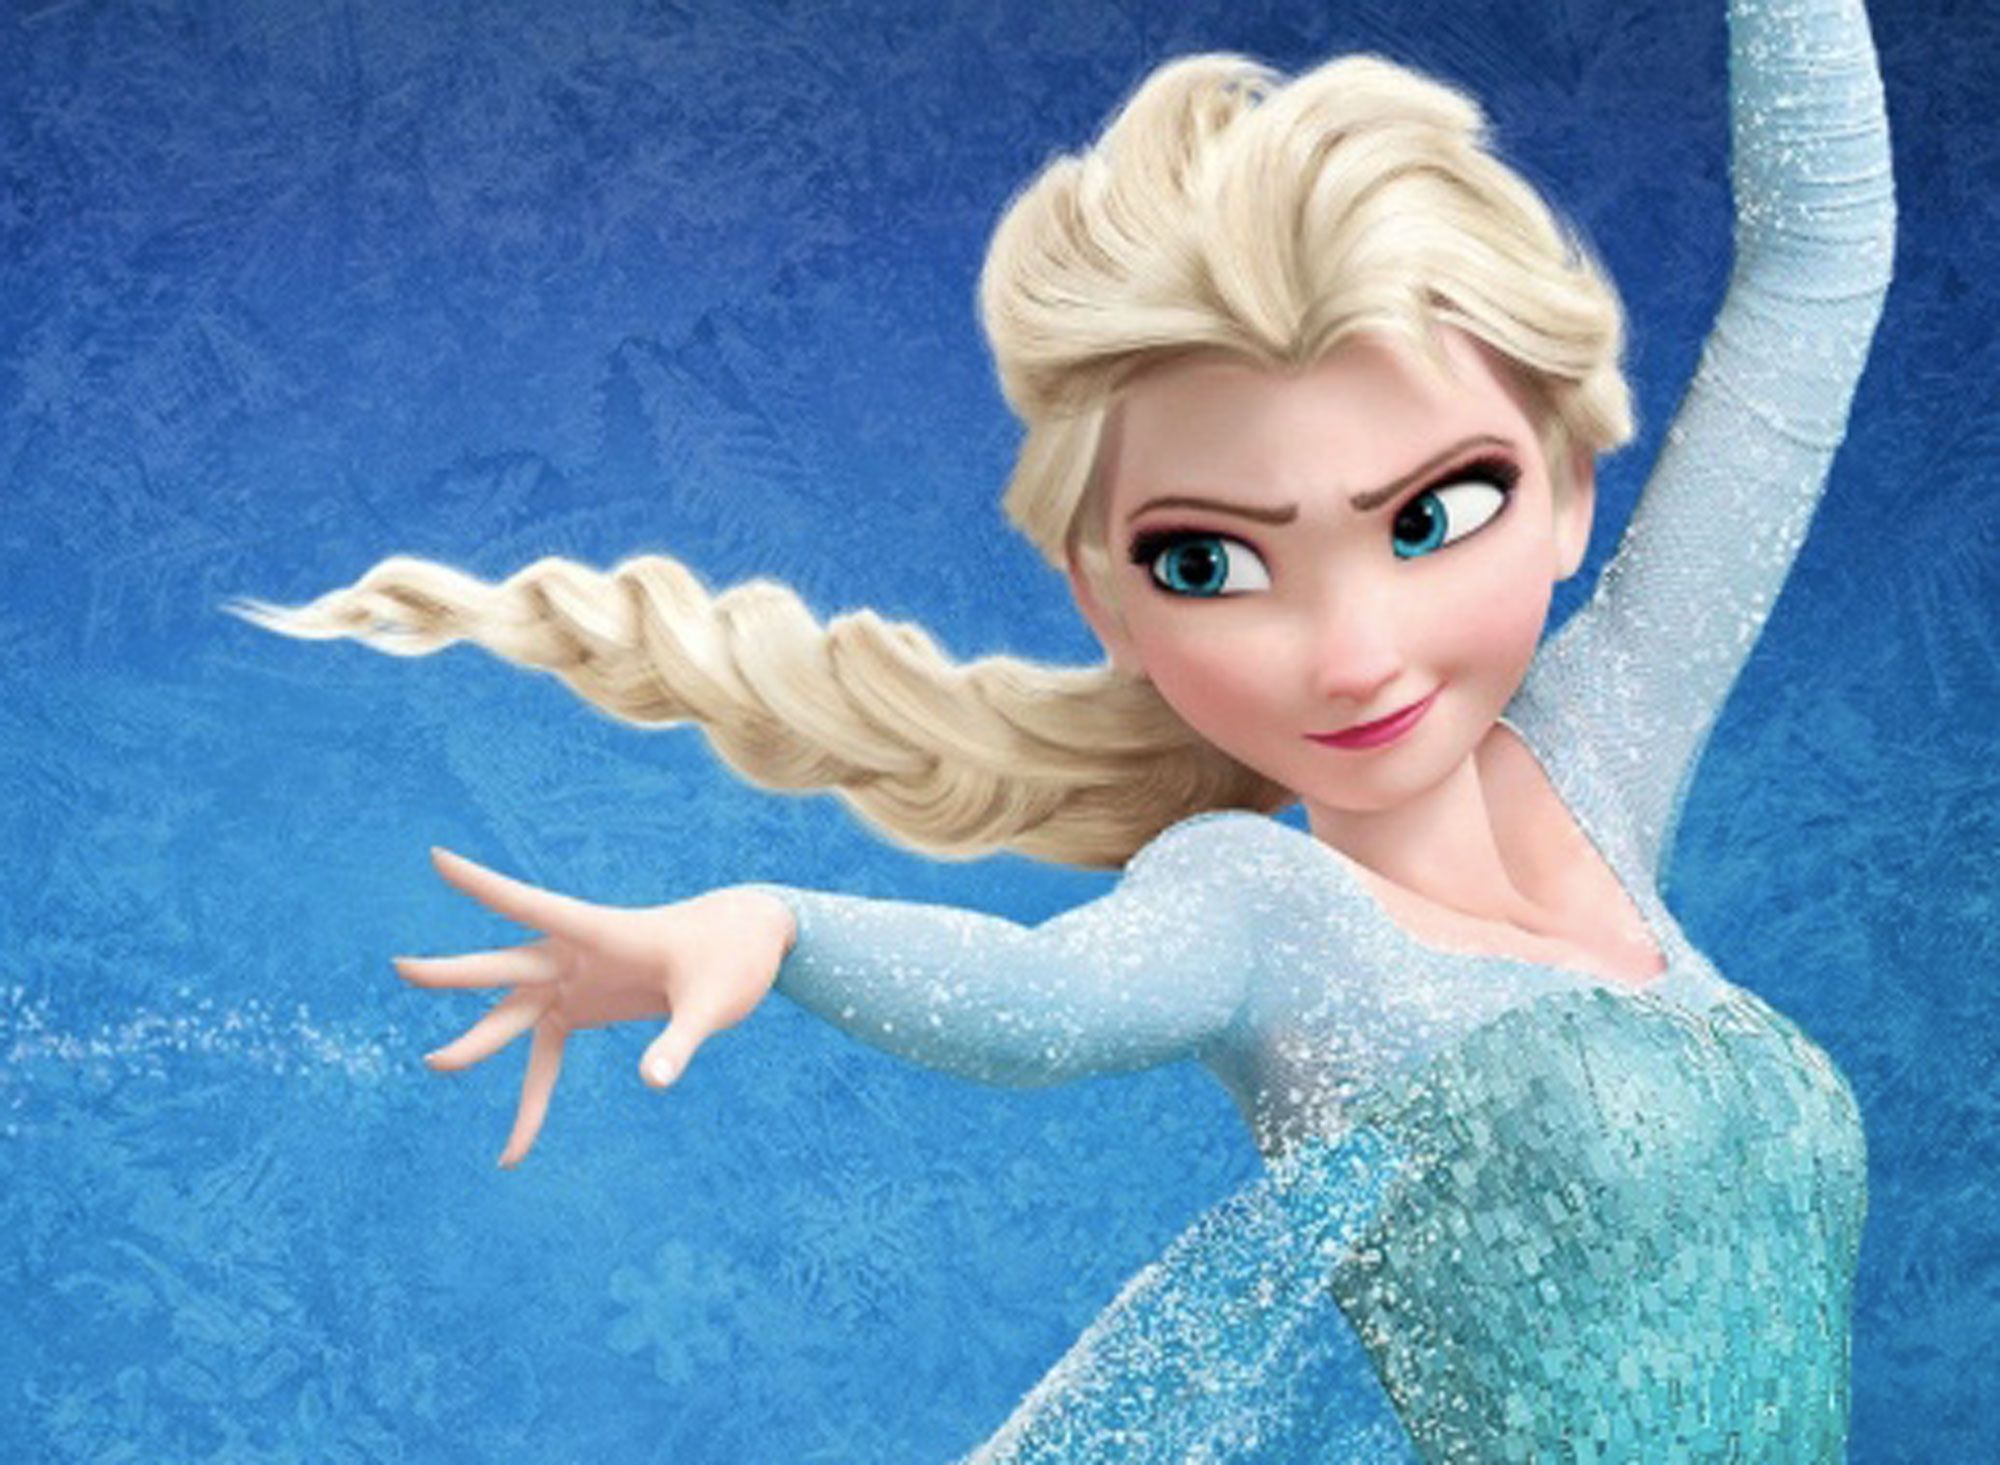 Frozen III': Everything We Know so Far